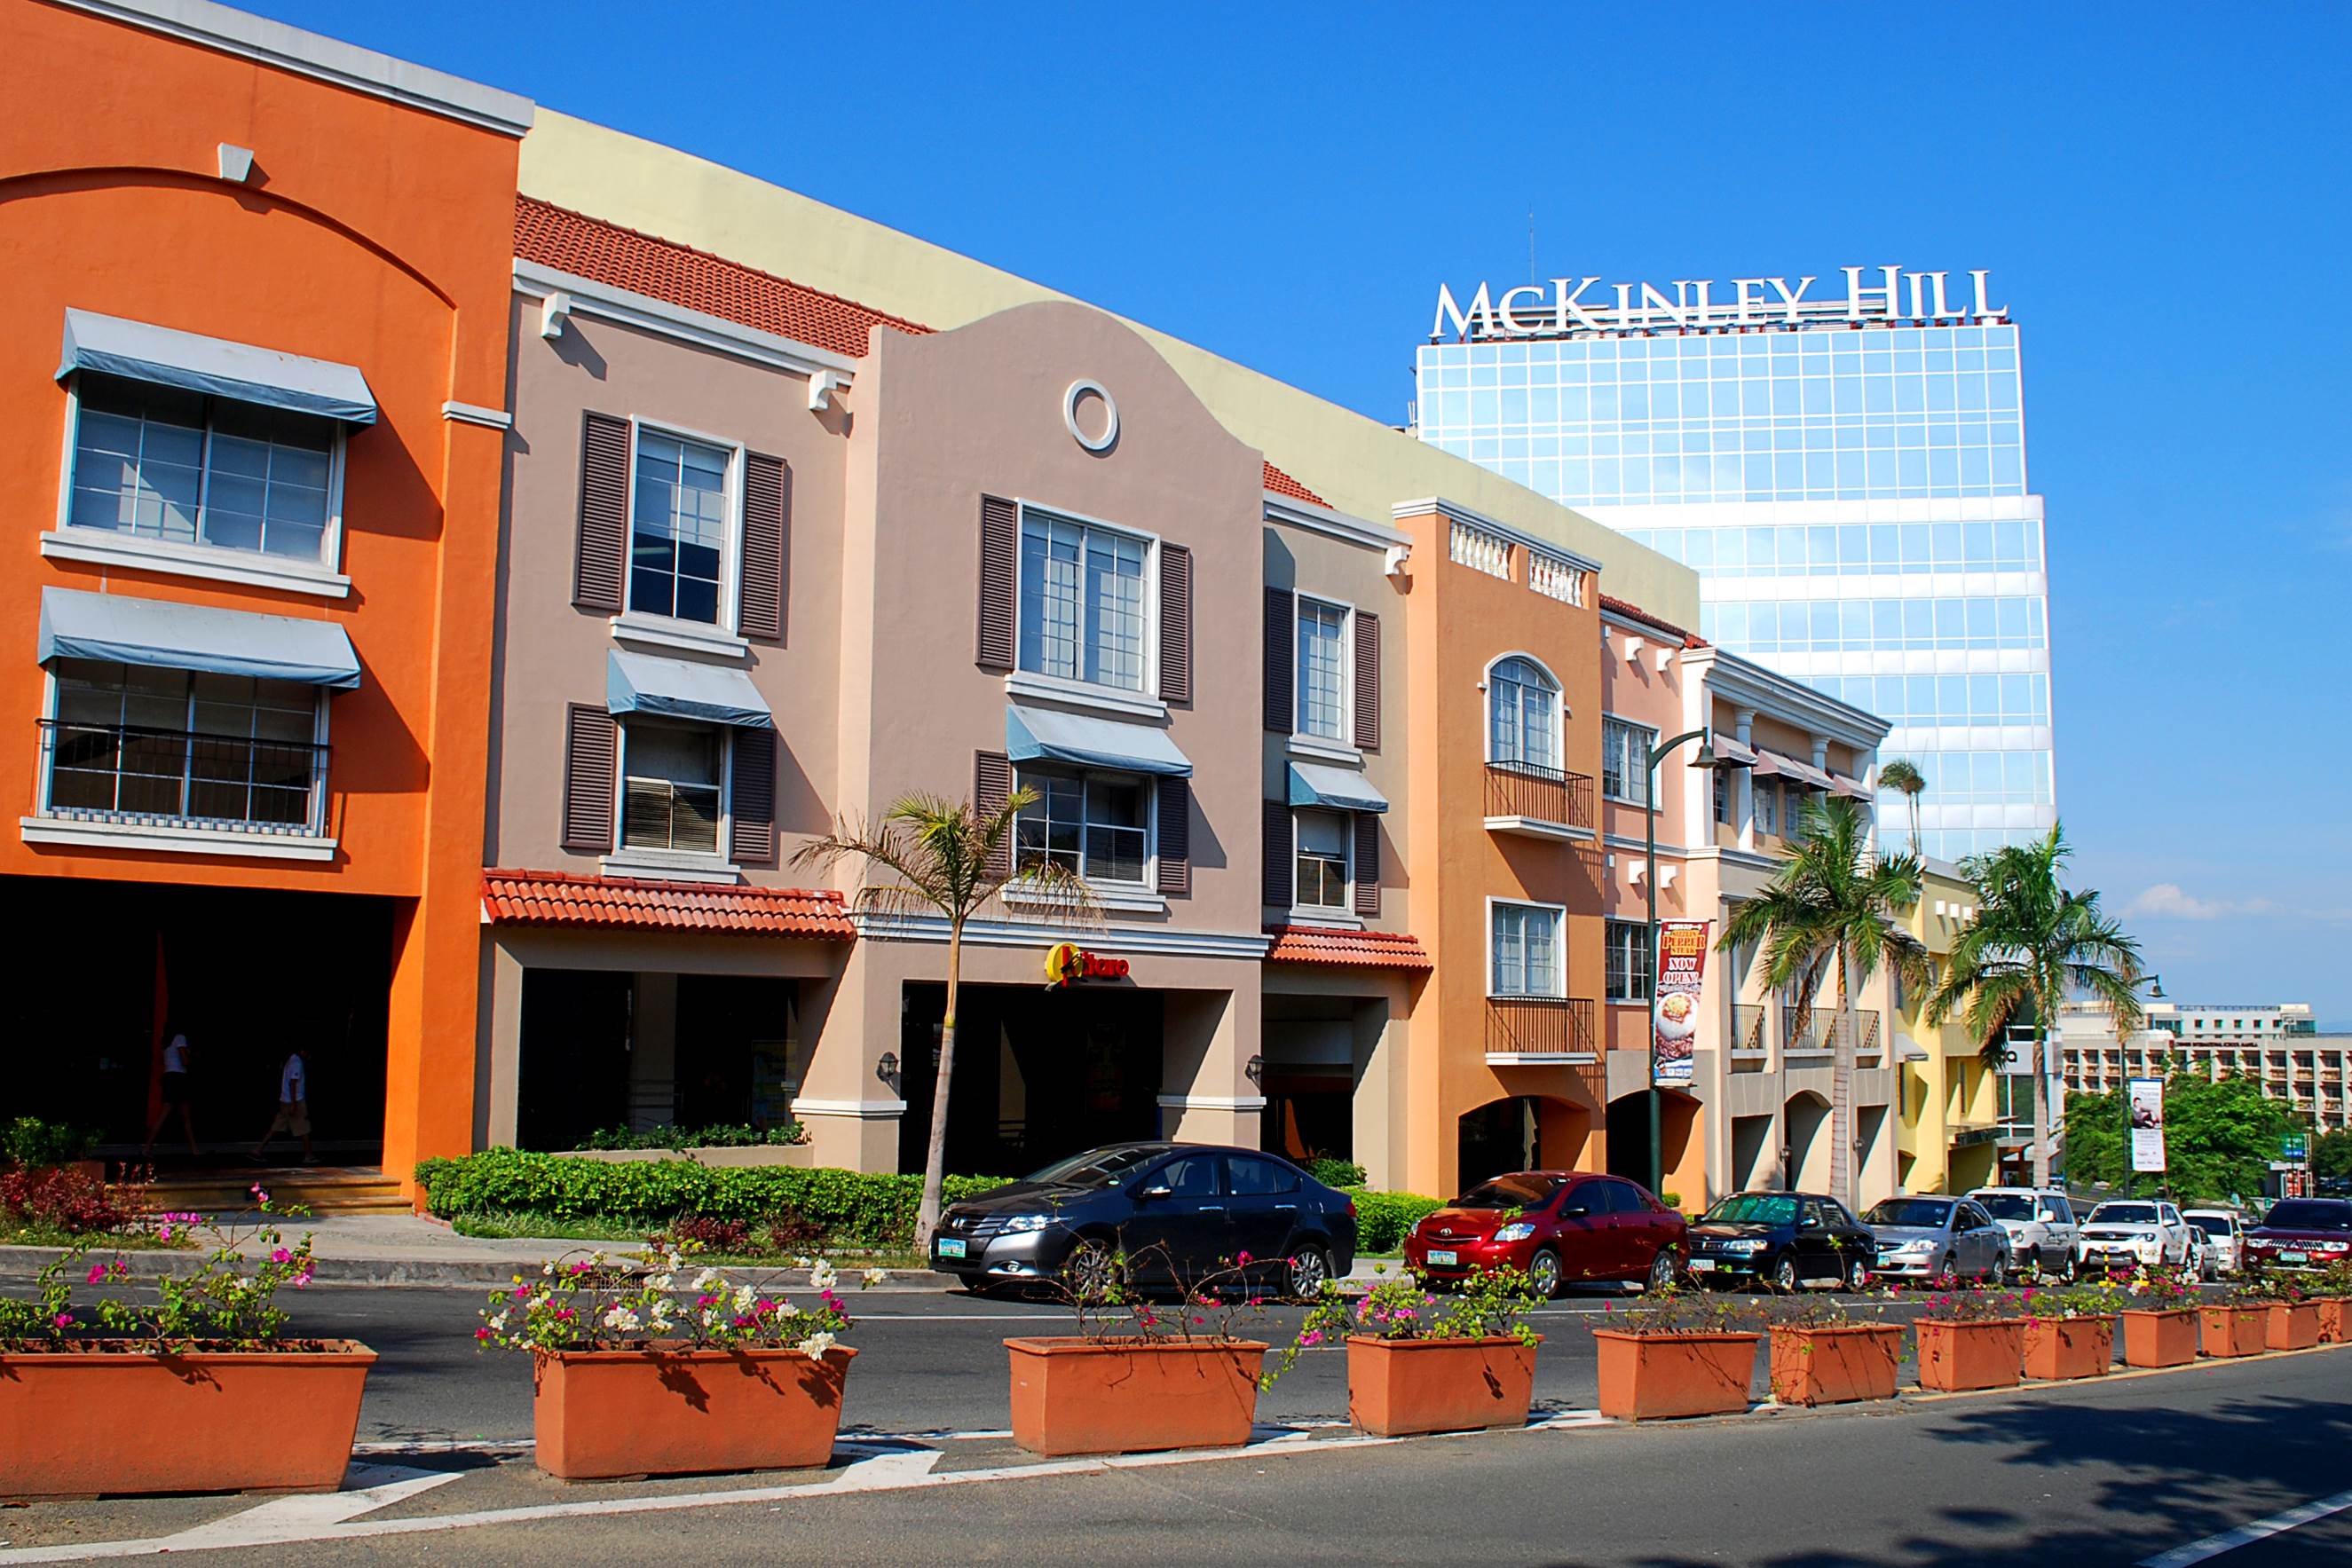 A Beginner's Guide to McKinley Hill